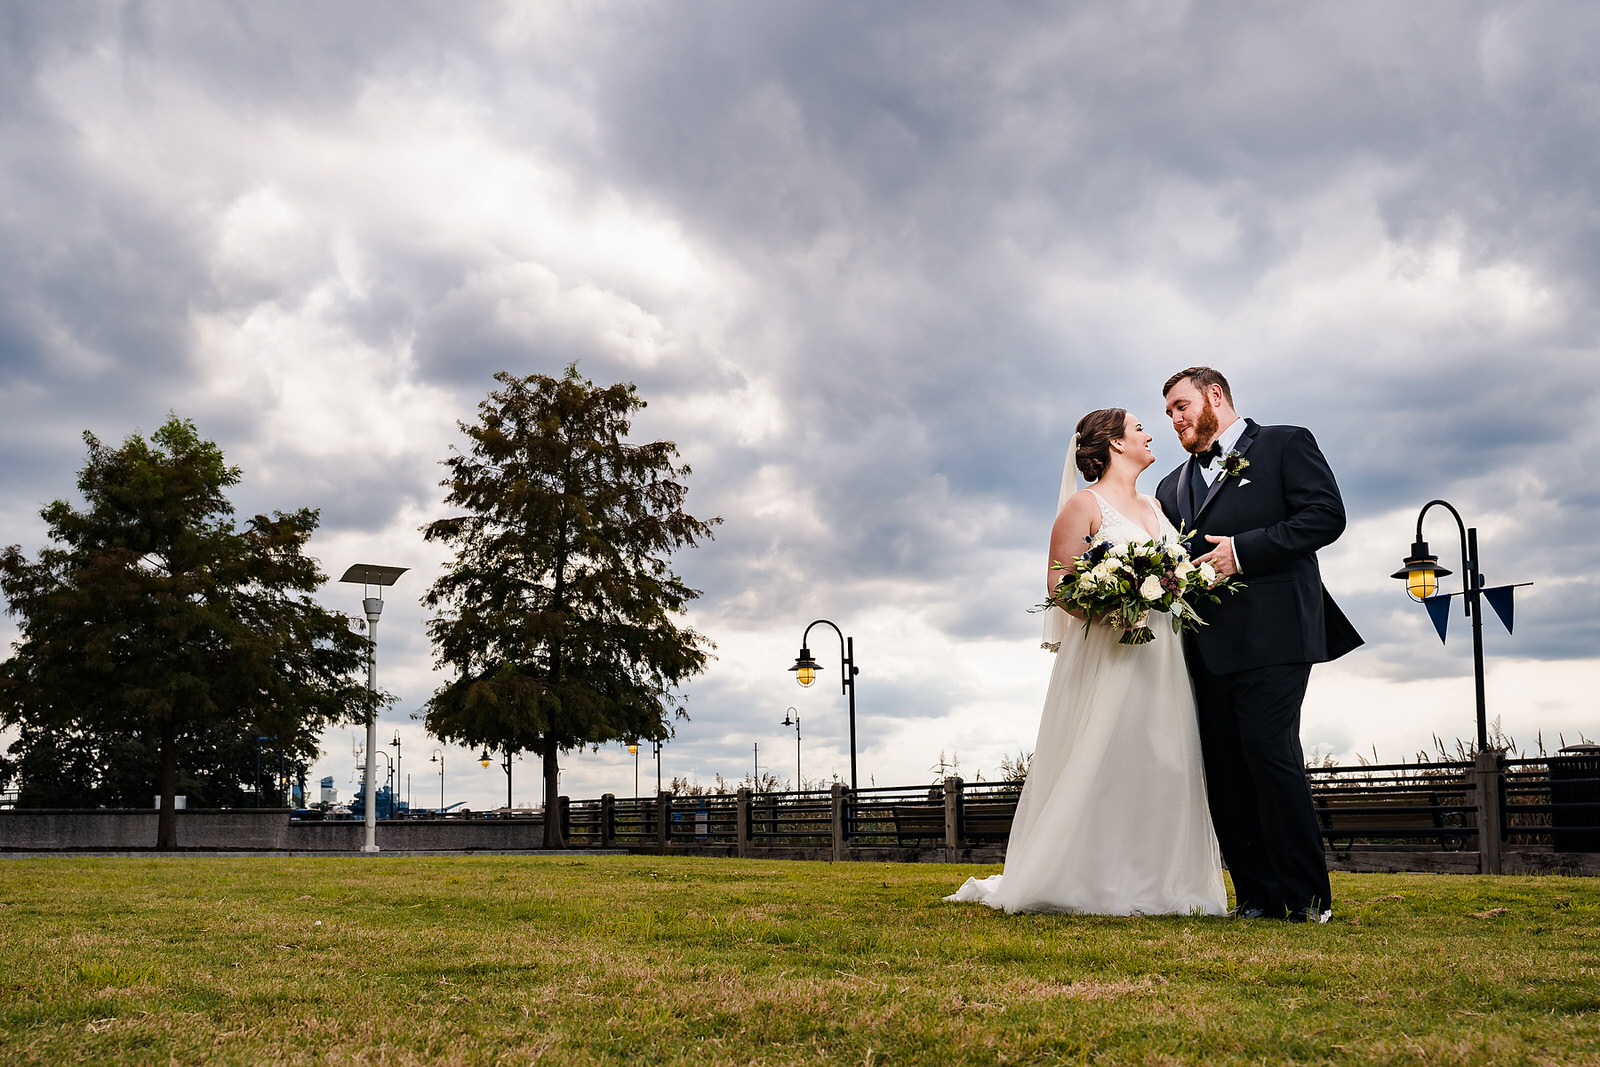 Bride and Groom pose at the Wilmington River Walk after their wedding at the Brooklyn Arts Center